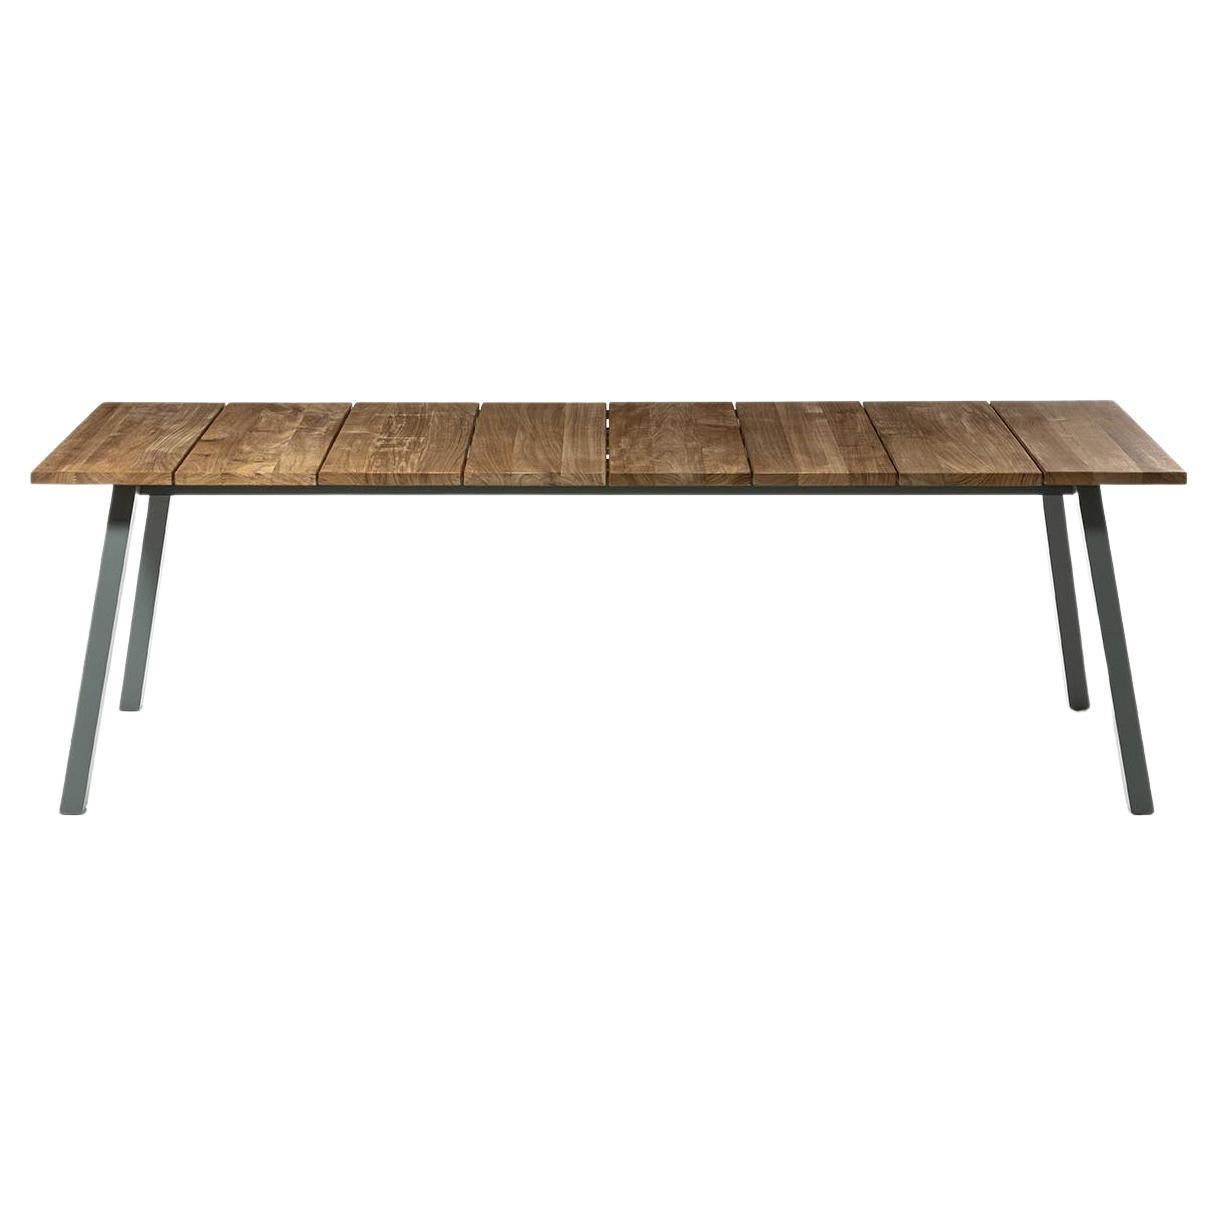 Gervasoni Large Inout Table in Natural Teak Slats Top with Grey Aluminium Frame For Sale